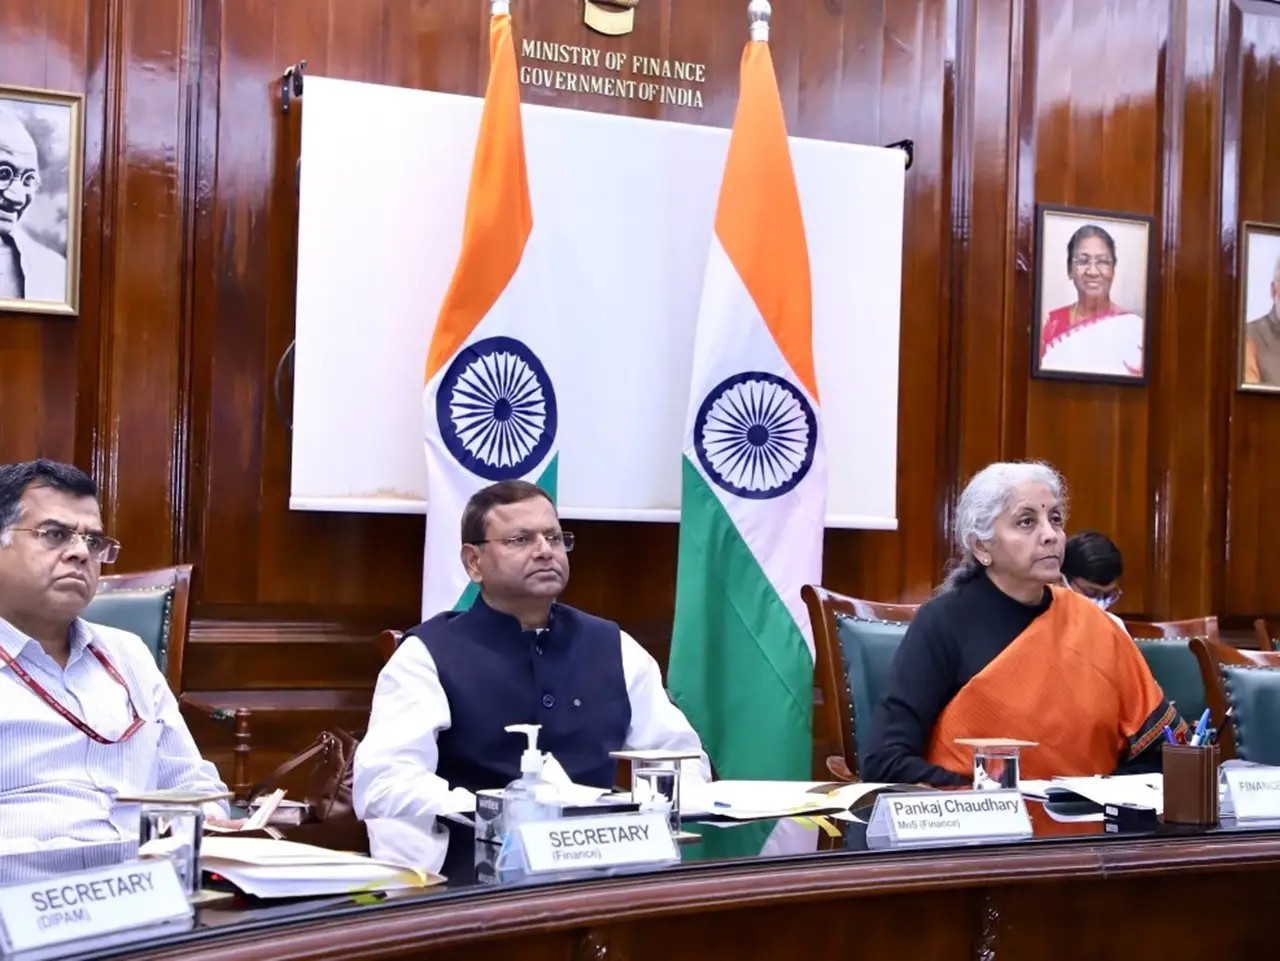 Union Finance Minister Chaired 4th Pre Budget 2023 consultation with the experts on Tuesday